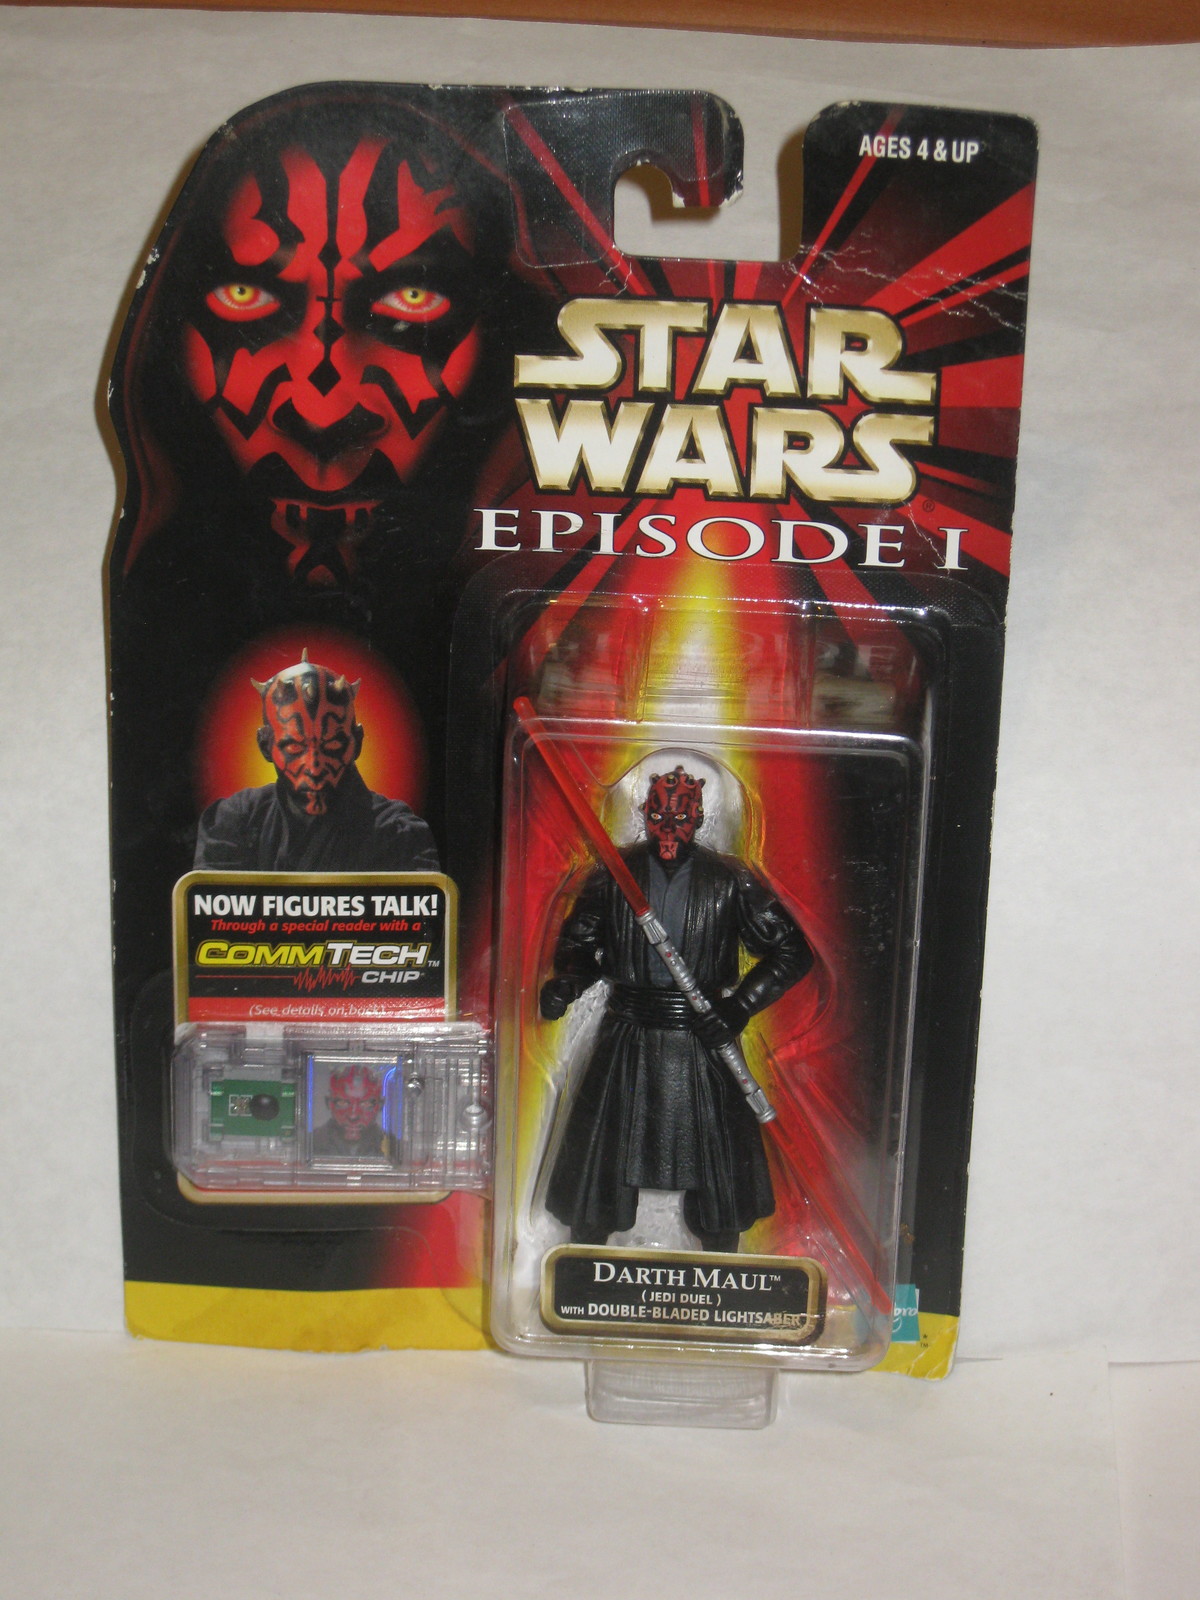 Primary image for 1998 Star Wars Episode 1 Darth Maul Jedi Duel Double Bladed Lightsaber CommTech